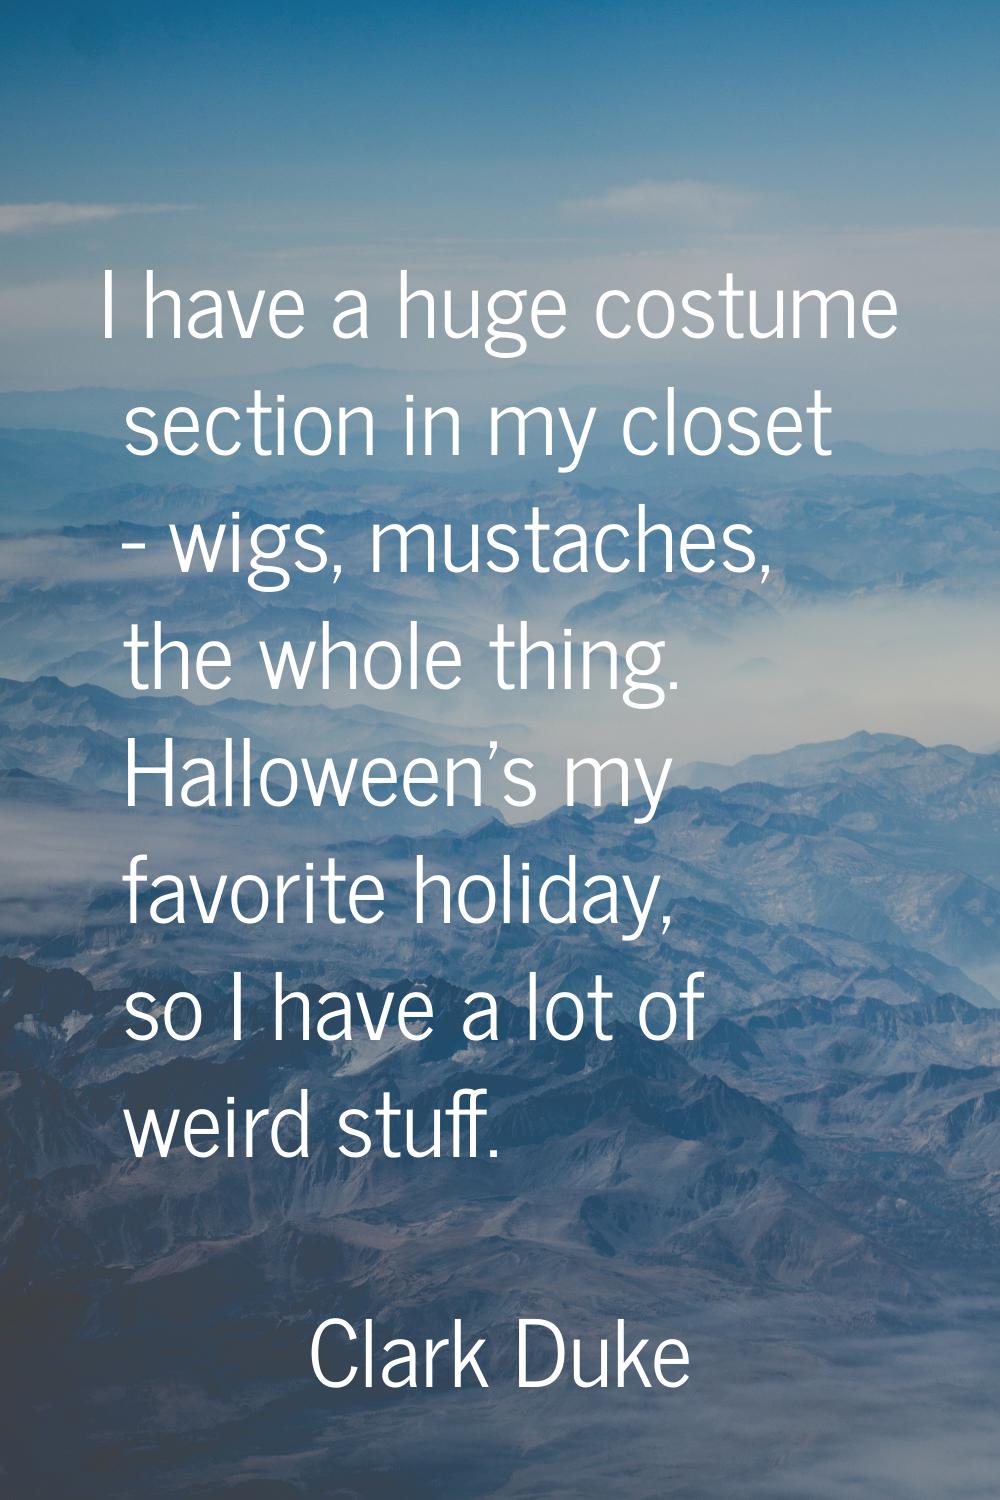 I have a huge costume section in my closet - wigs, mustaches, the whole thing. Halloween's my favor